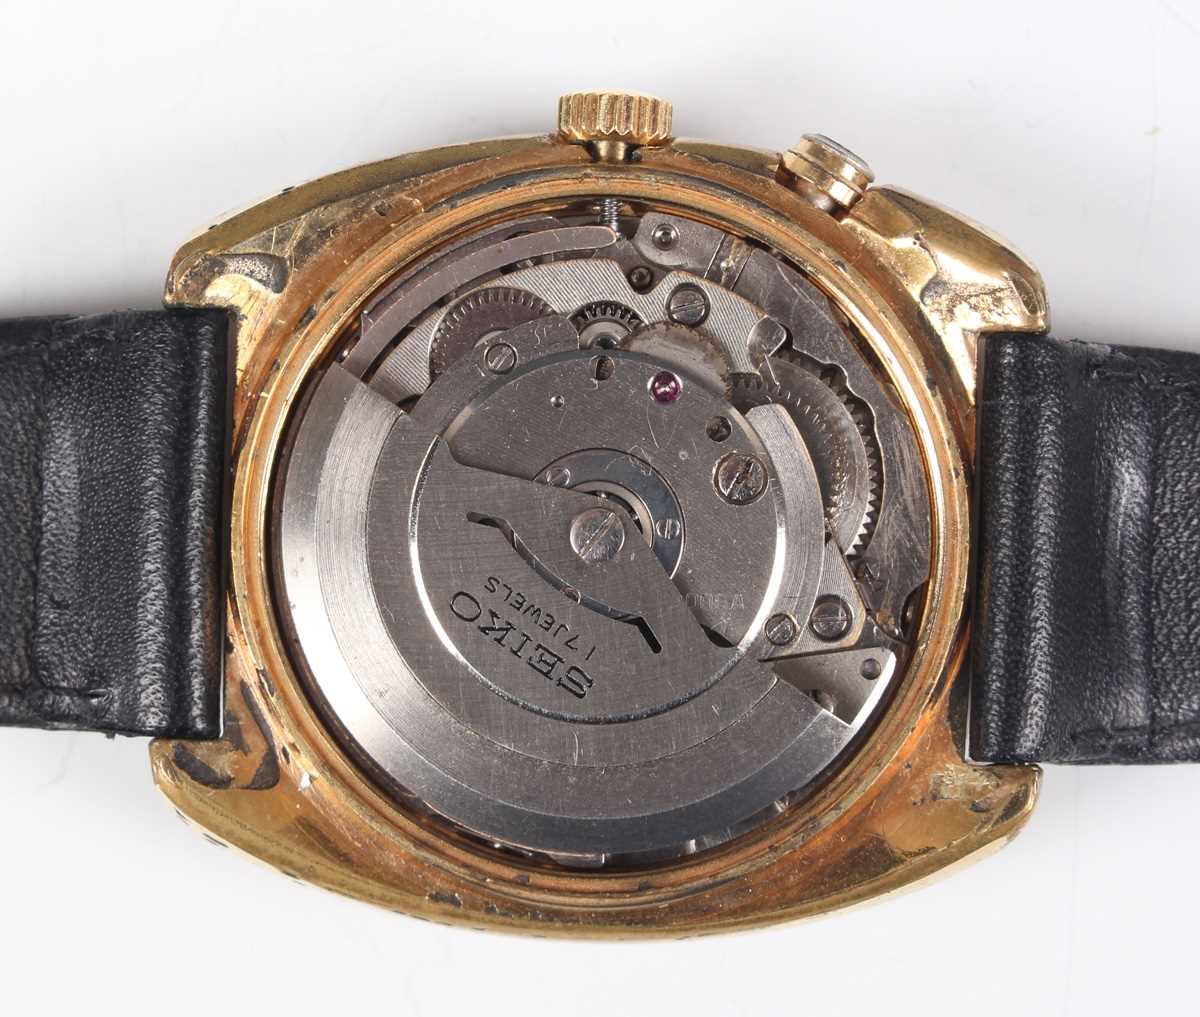 A Seiko Bell-Matic gilt metal fronted and steel backed gentleman's wristwatch, Ref. 4006-6031, circa - Image 3 of 6